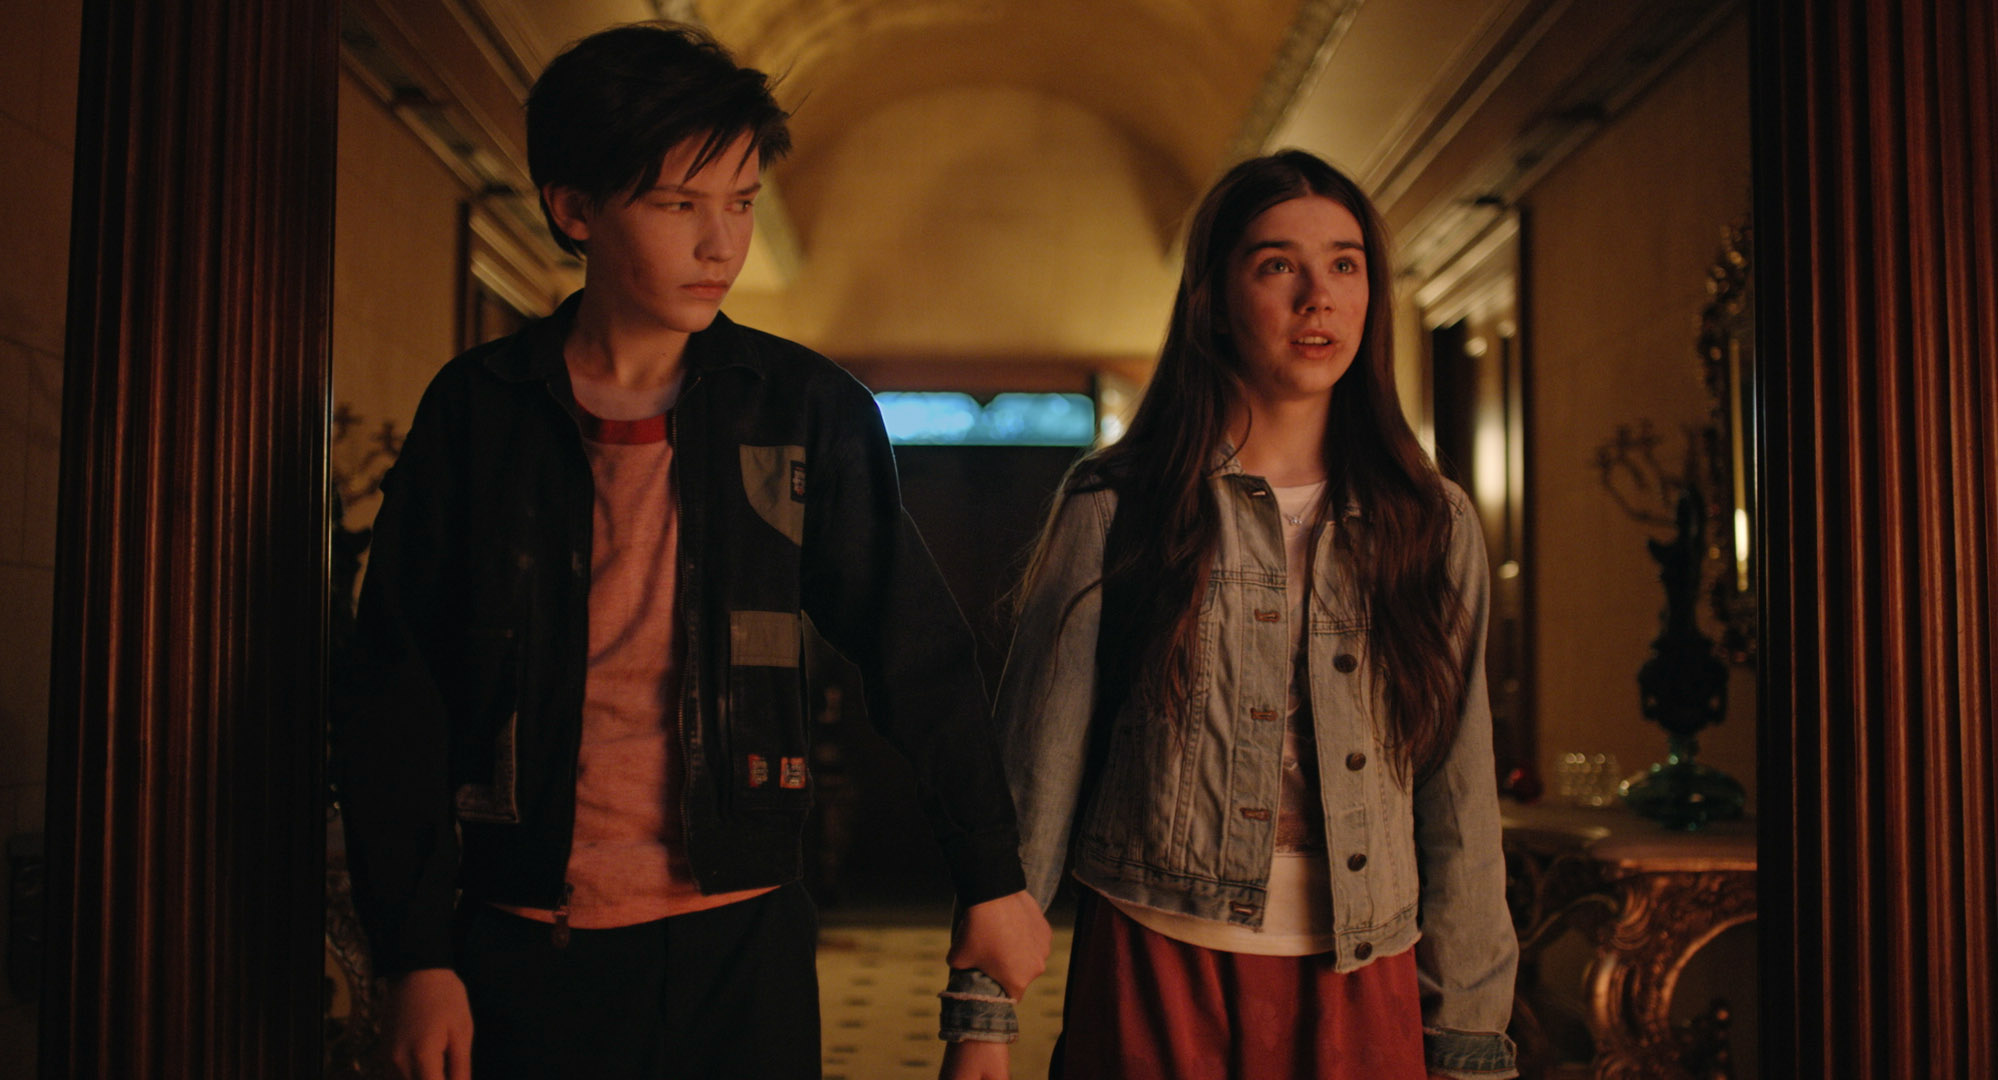 Jacob and Isabel stand together in a hall lit with red-orange light. He is looking at her and holding onto her wrist, while she looks ahead with a shocked/scared expression.